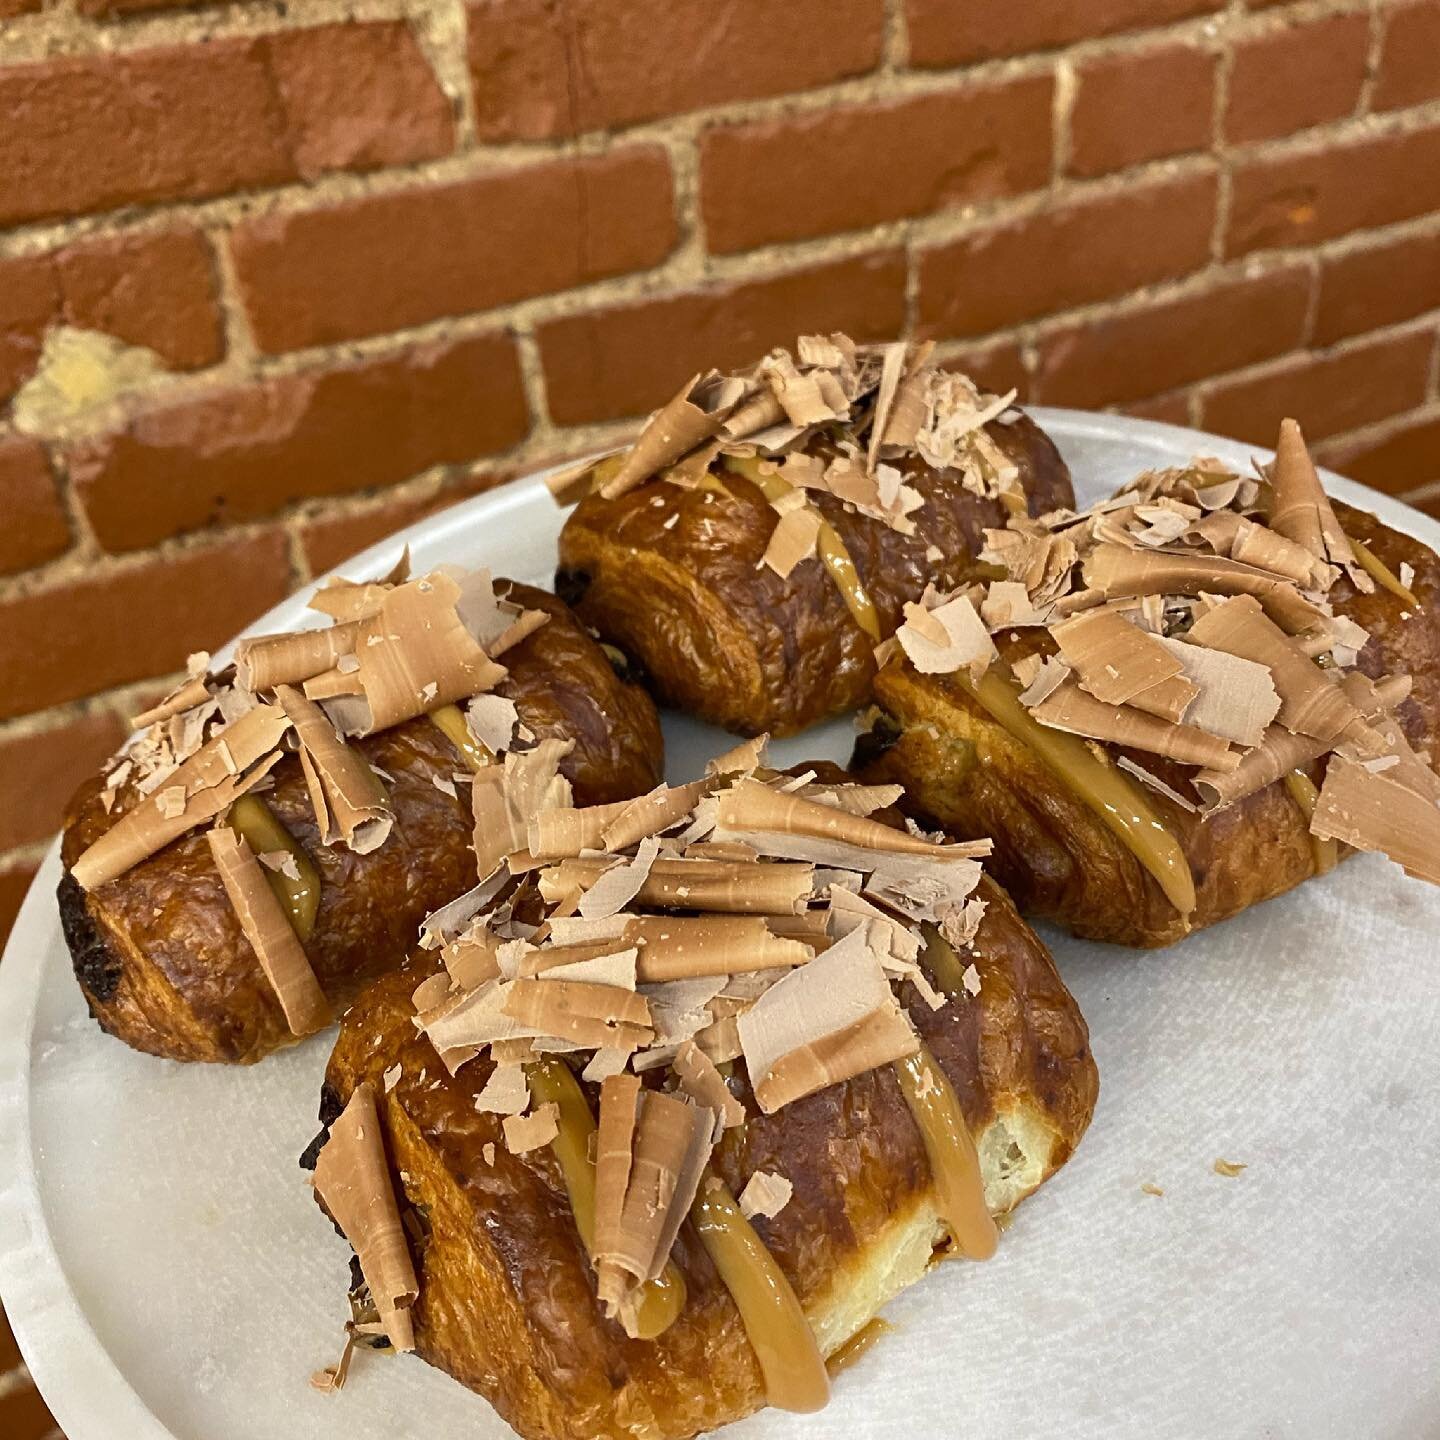 New to the AM line up... Tested and approved!!
The milk chocolate and caramel croissant. Limited supply, gotta get in early to get this gem. Or call the reserve your spot in line! #croissant #chocolatecroissant #butter #caramel #chocolate #milkchocol